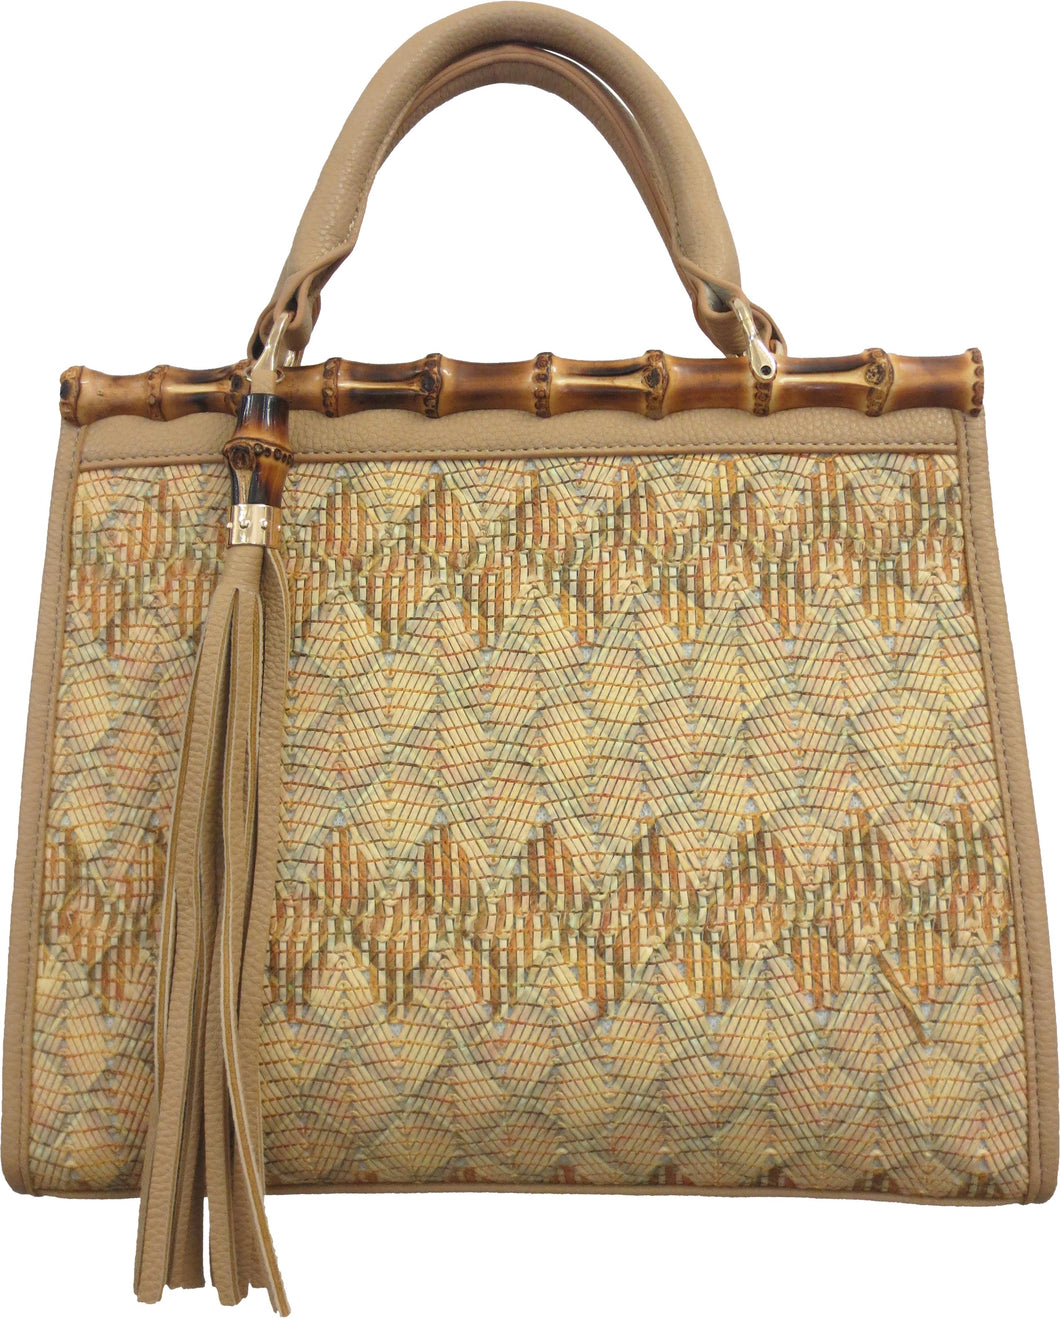 Woven Satchel With Bamboo Trim